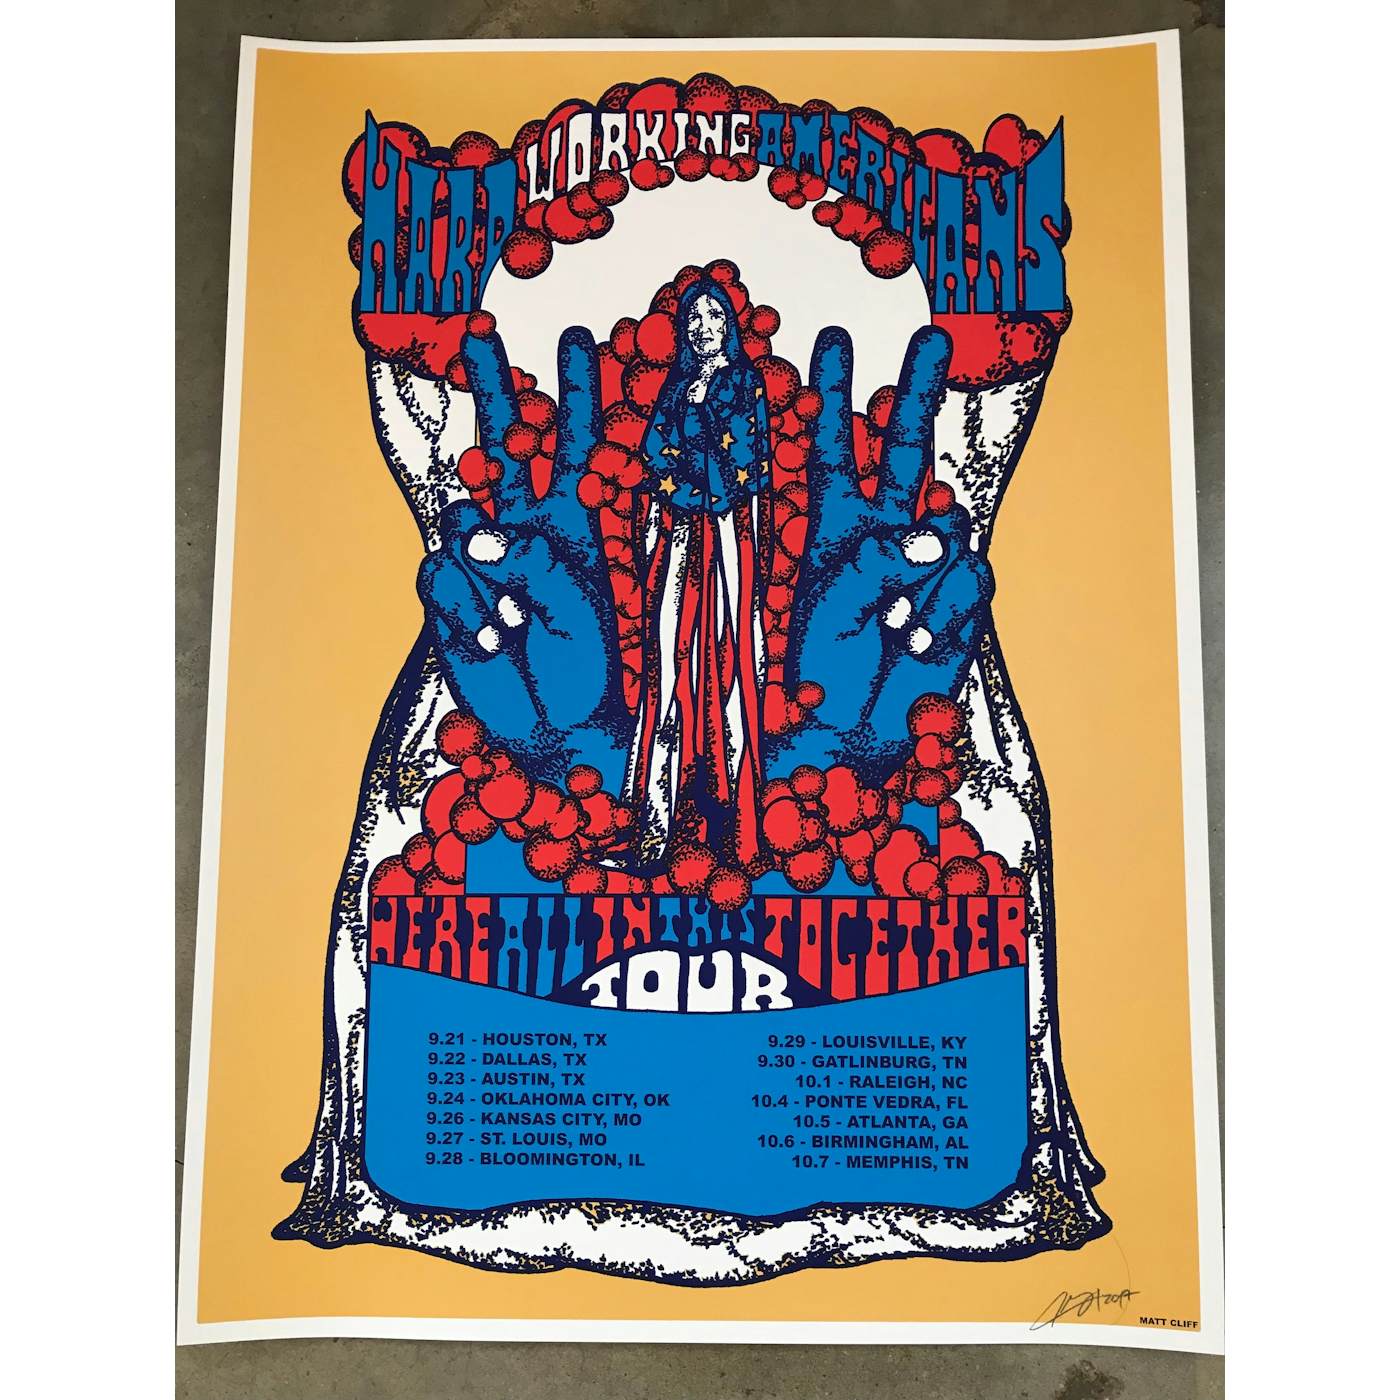 Hard Working Americans 2017 Tour Poster